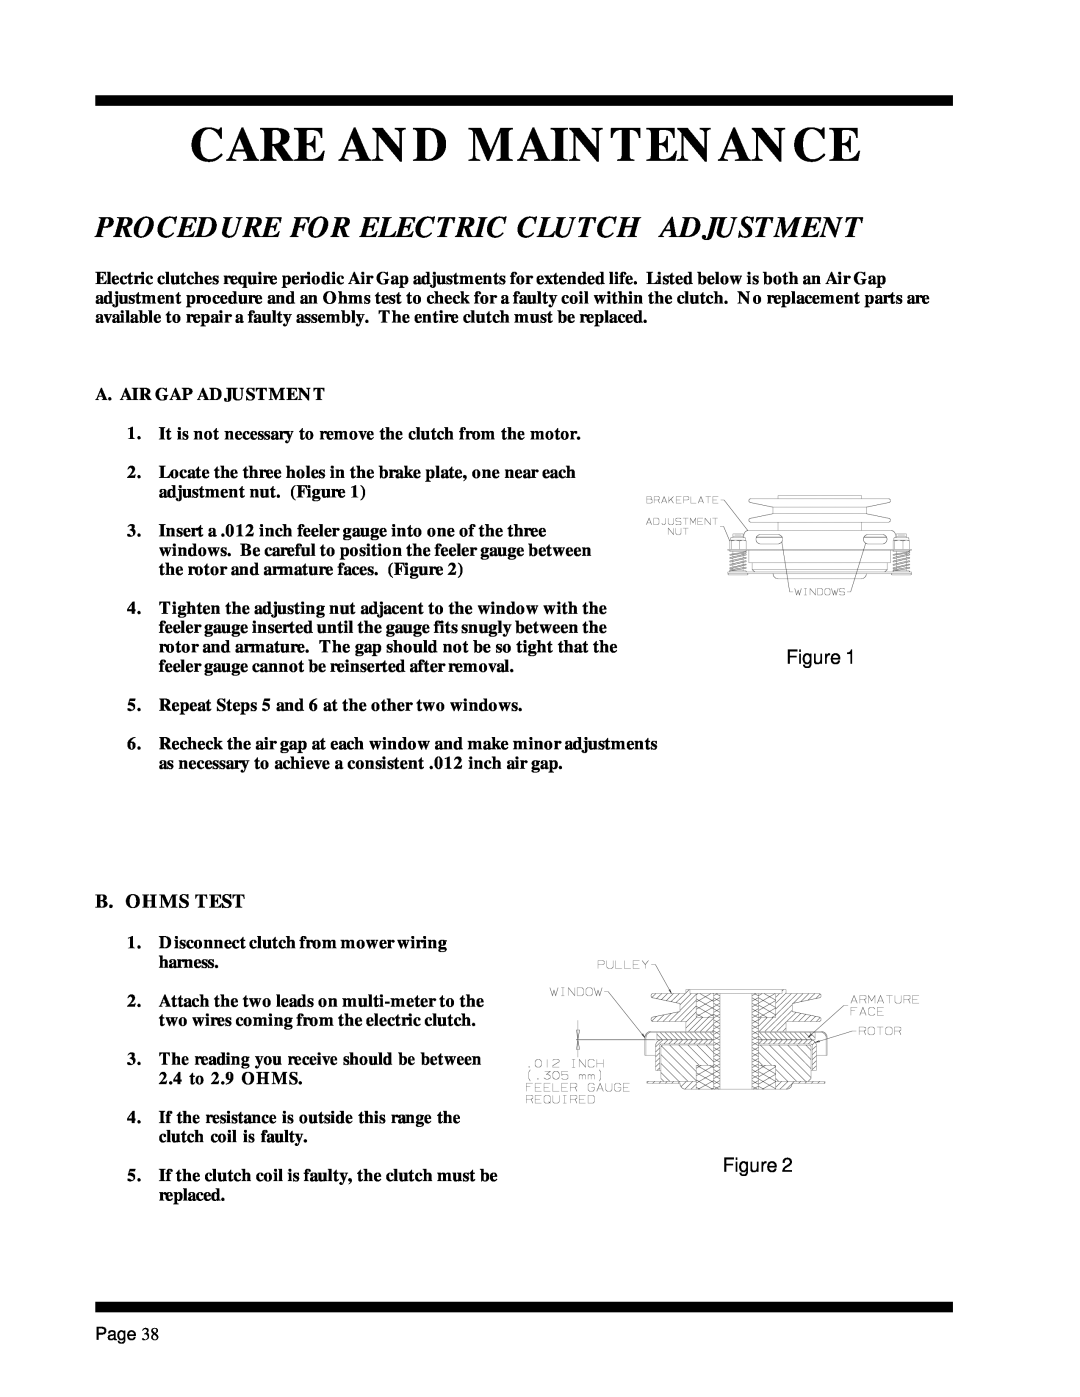 Dixon ZTR 5017Twin manual Procedure For Electric Clutch Adjustment, Care And Maintenance, B. Ohms Test 